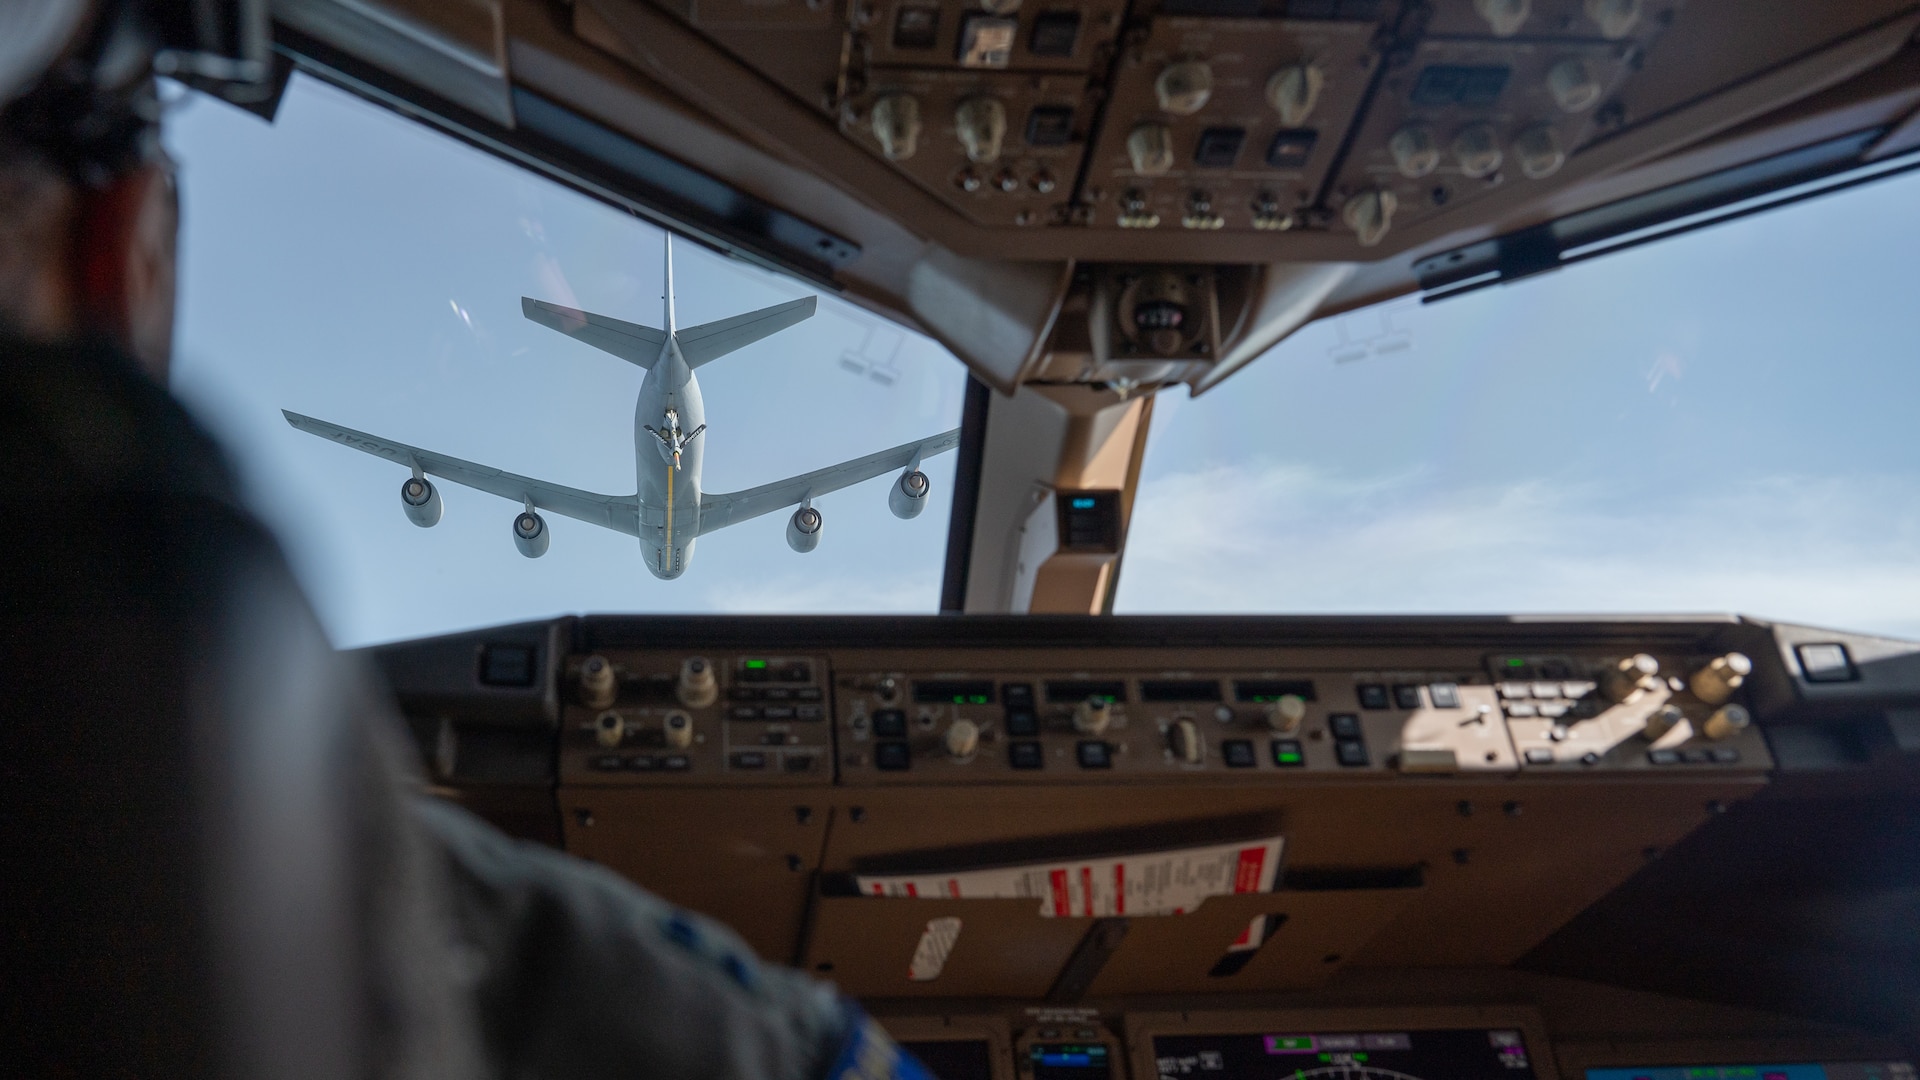 The view of a KC-135 through the cockpit of a KC-46.